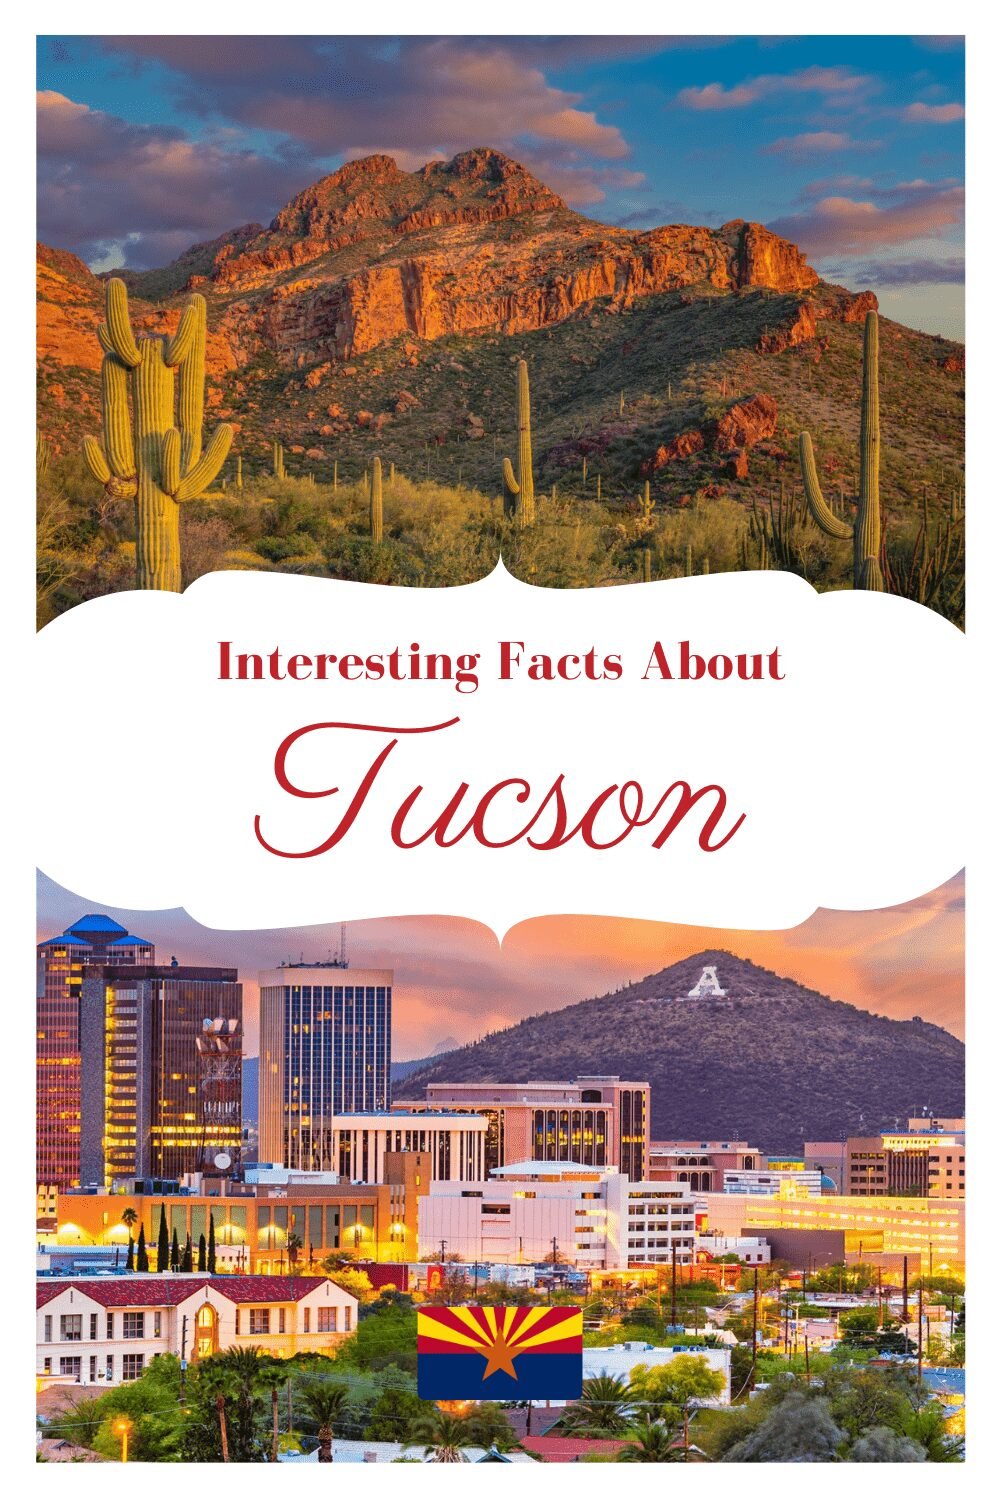 Facts About Tucson